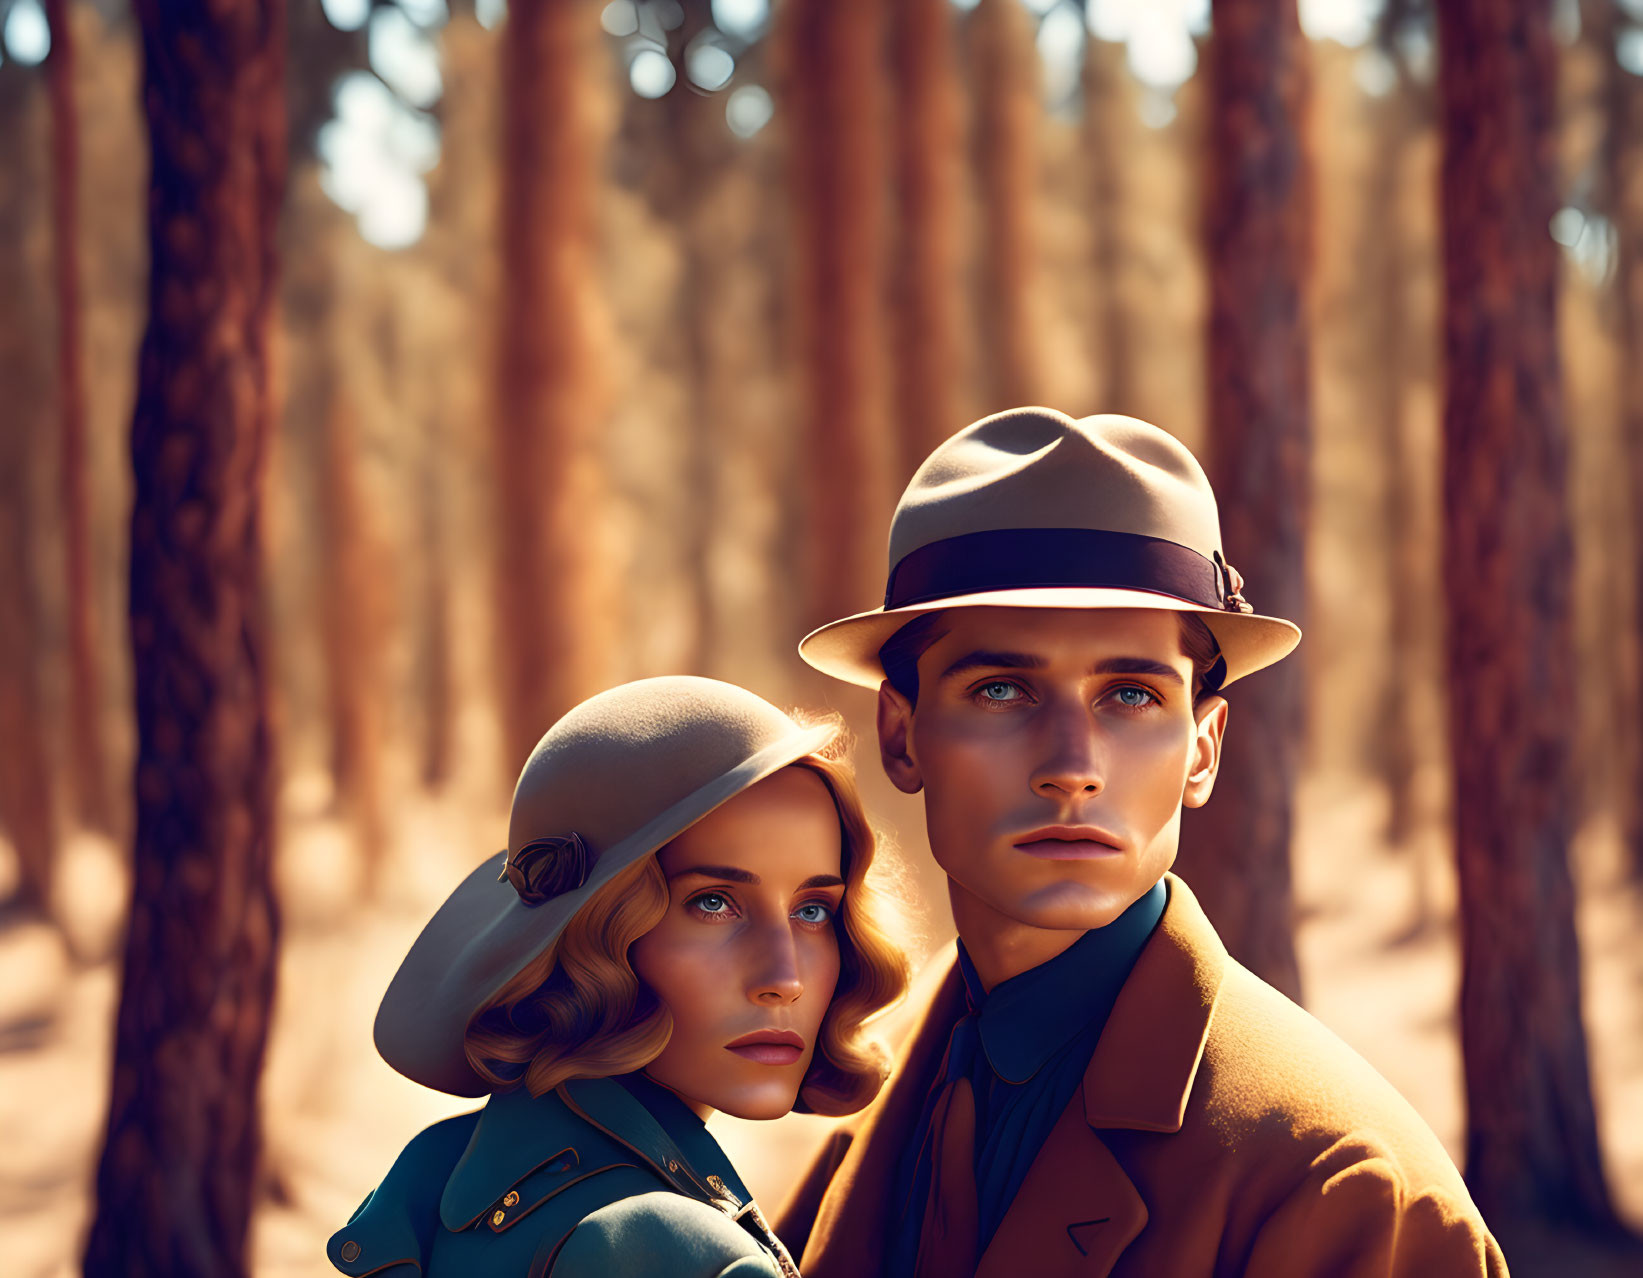 Vintage Clothing Couple Among Tall Trees in Golden Sunlight